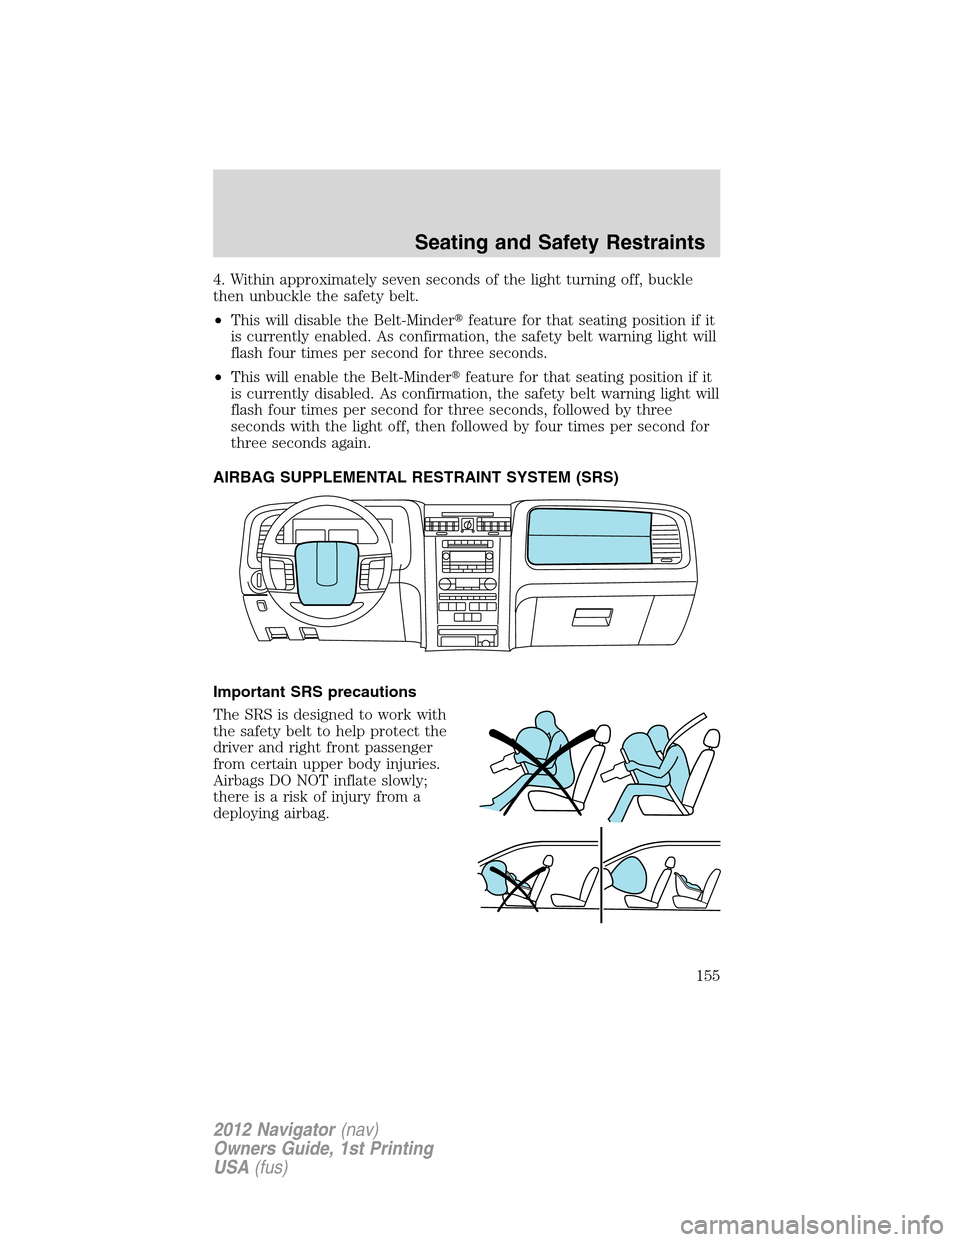 LINCOLN NAVIGATOR 2012  Owners Manual 4. Within approximately seven seconds of the light turning off, buckle
then unbuckle the safety belt.
•This will disable the Belt-Minderfeature for that seating position if it
is currently enabled.